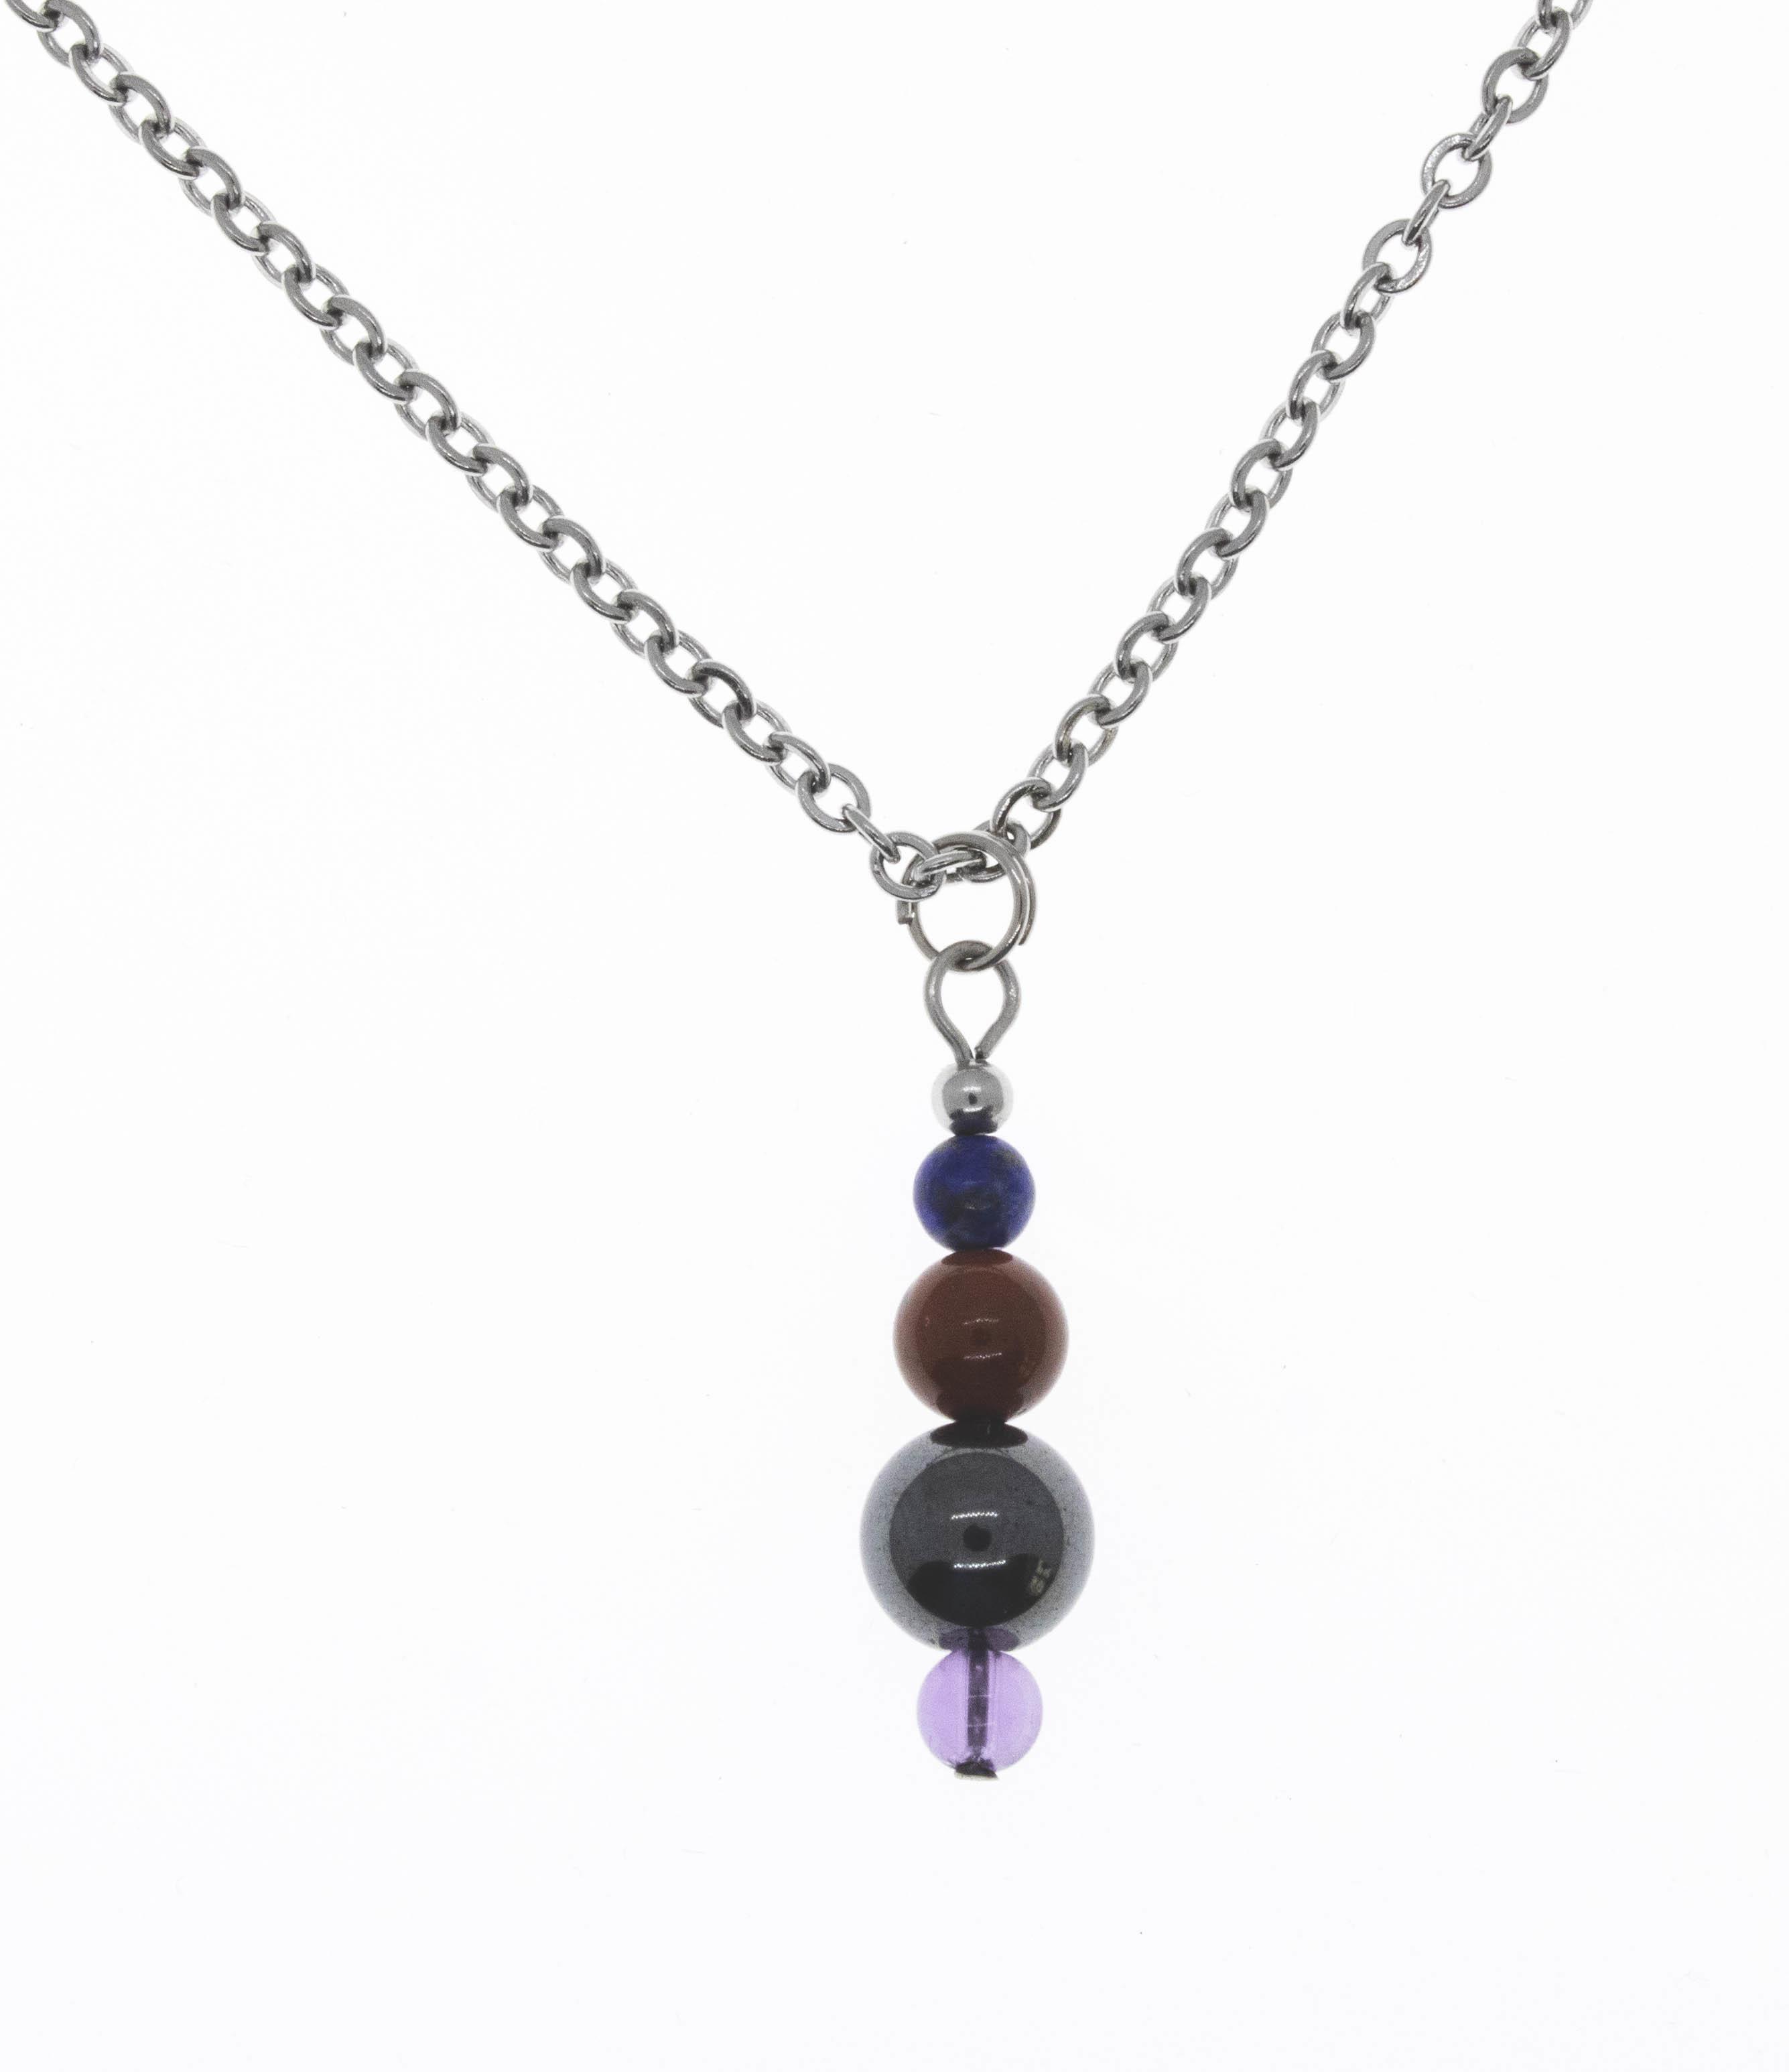 Feng Shui Healing Crystal Necklace Lucky Zodiac Animals Charm Balance  Necklace Natural Obsidian Necklace for Natarl Year Wealth Amulet Attract  Prosperity Love Luck Money,Ox Fashion accessories ( Color : Amazon.co.uk:  Fashion